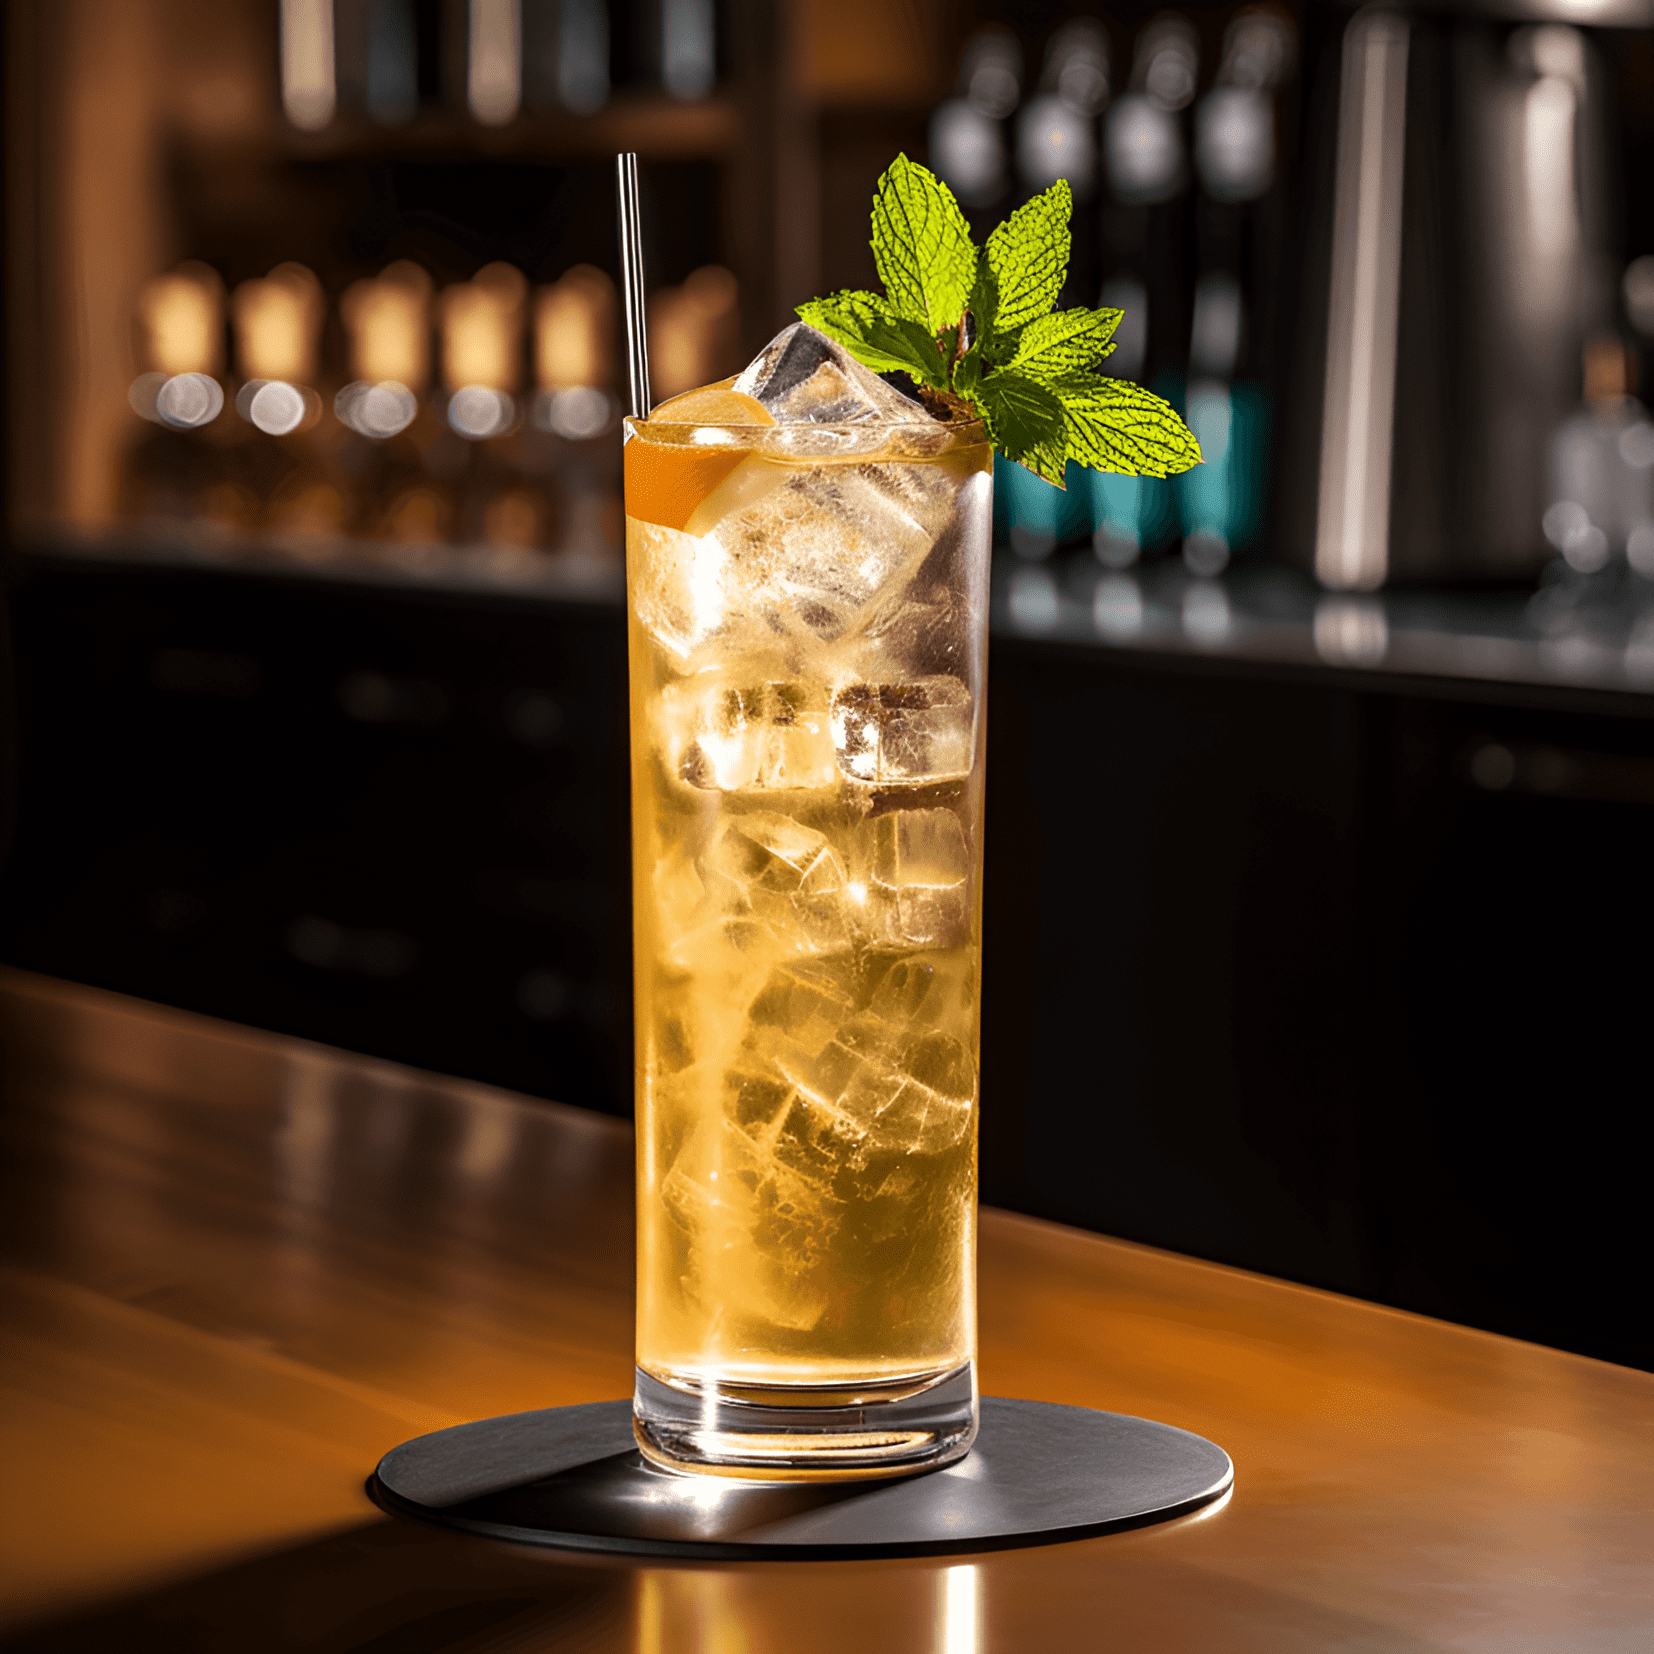 Bourbon Cooler Cocktail Recipe - The Bourbon Cooler has a smooth, slightly sweet, and refreshing taste. The bourbon provides a rich and warm base, while the lemon and mint add a bright and zesty kick. The club soda gives it a light and effervescent finish.